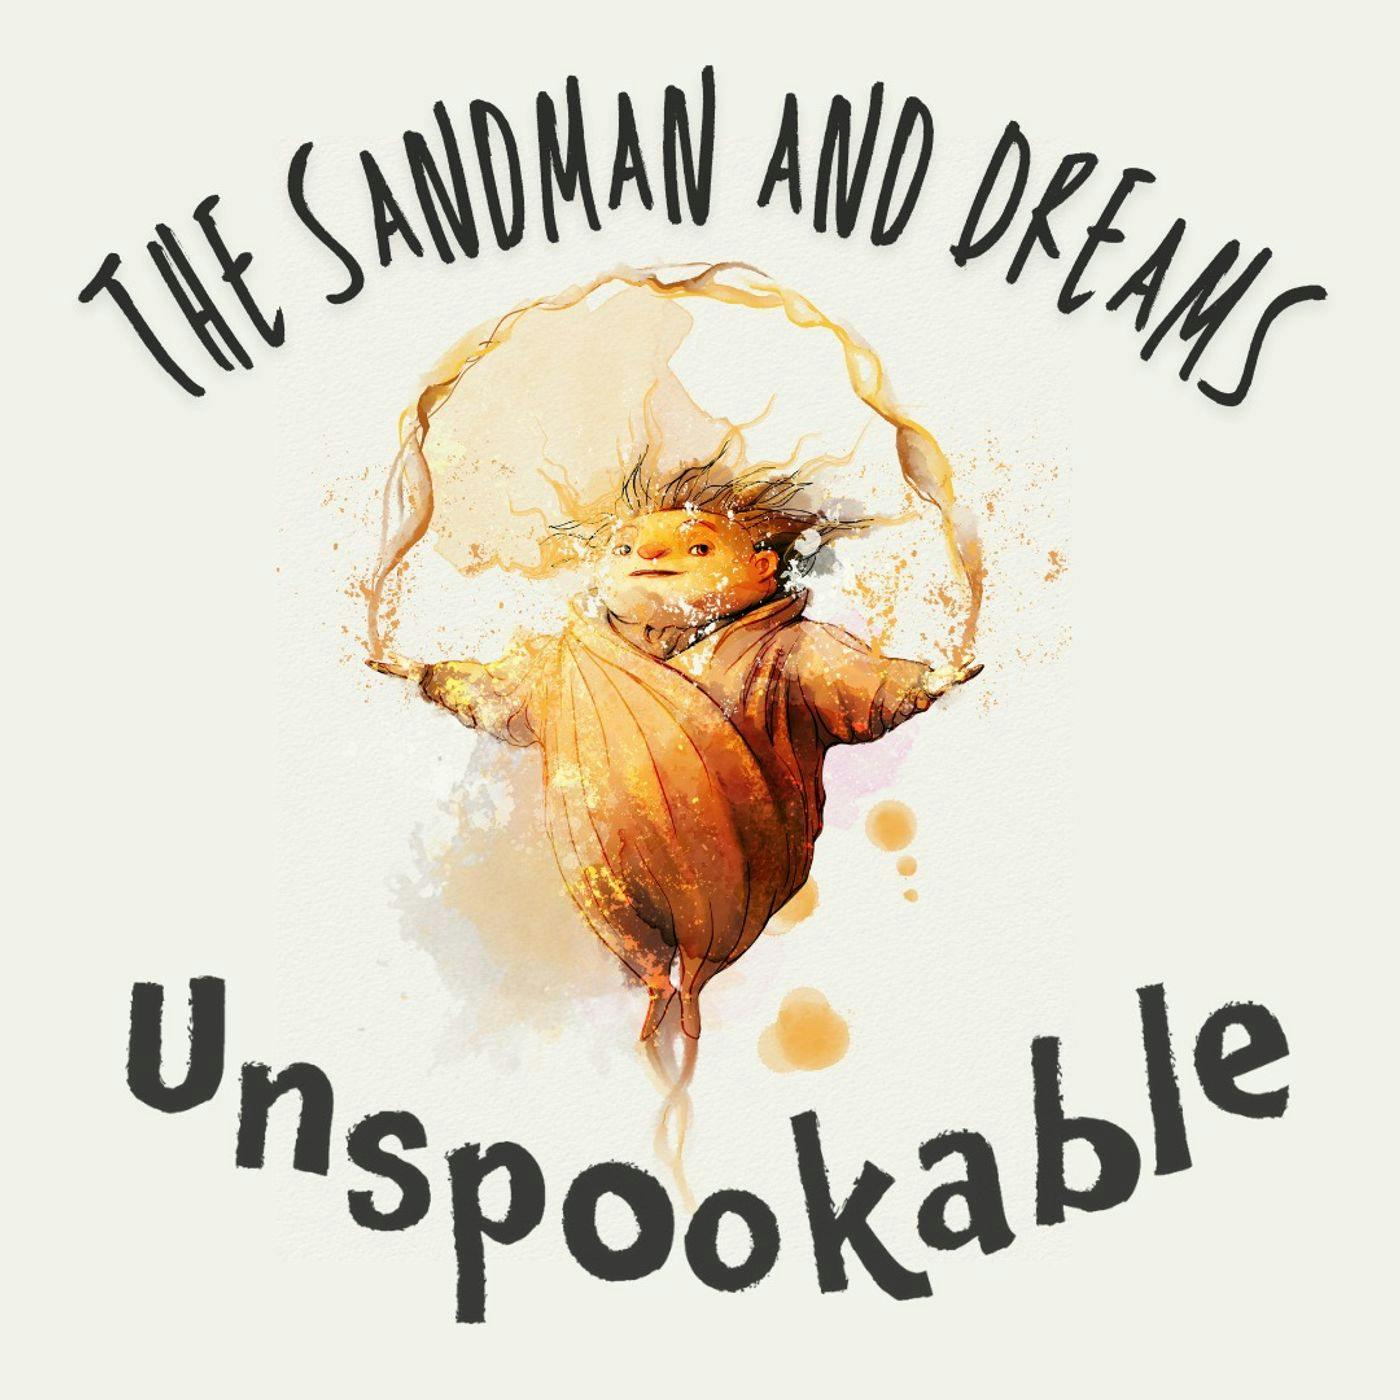 Episode 35: The Sandman and Dreams